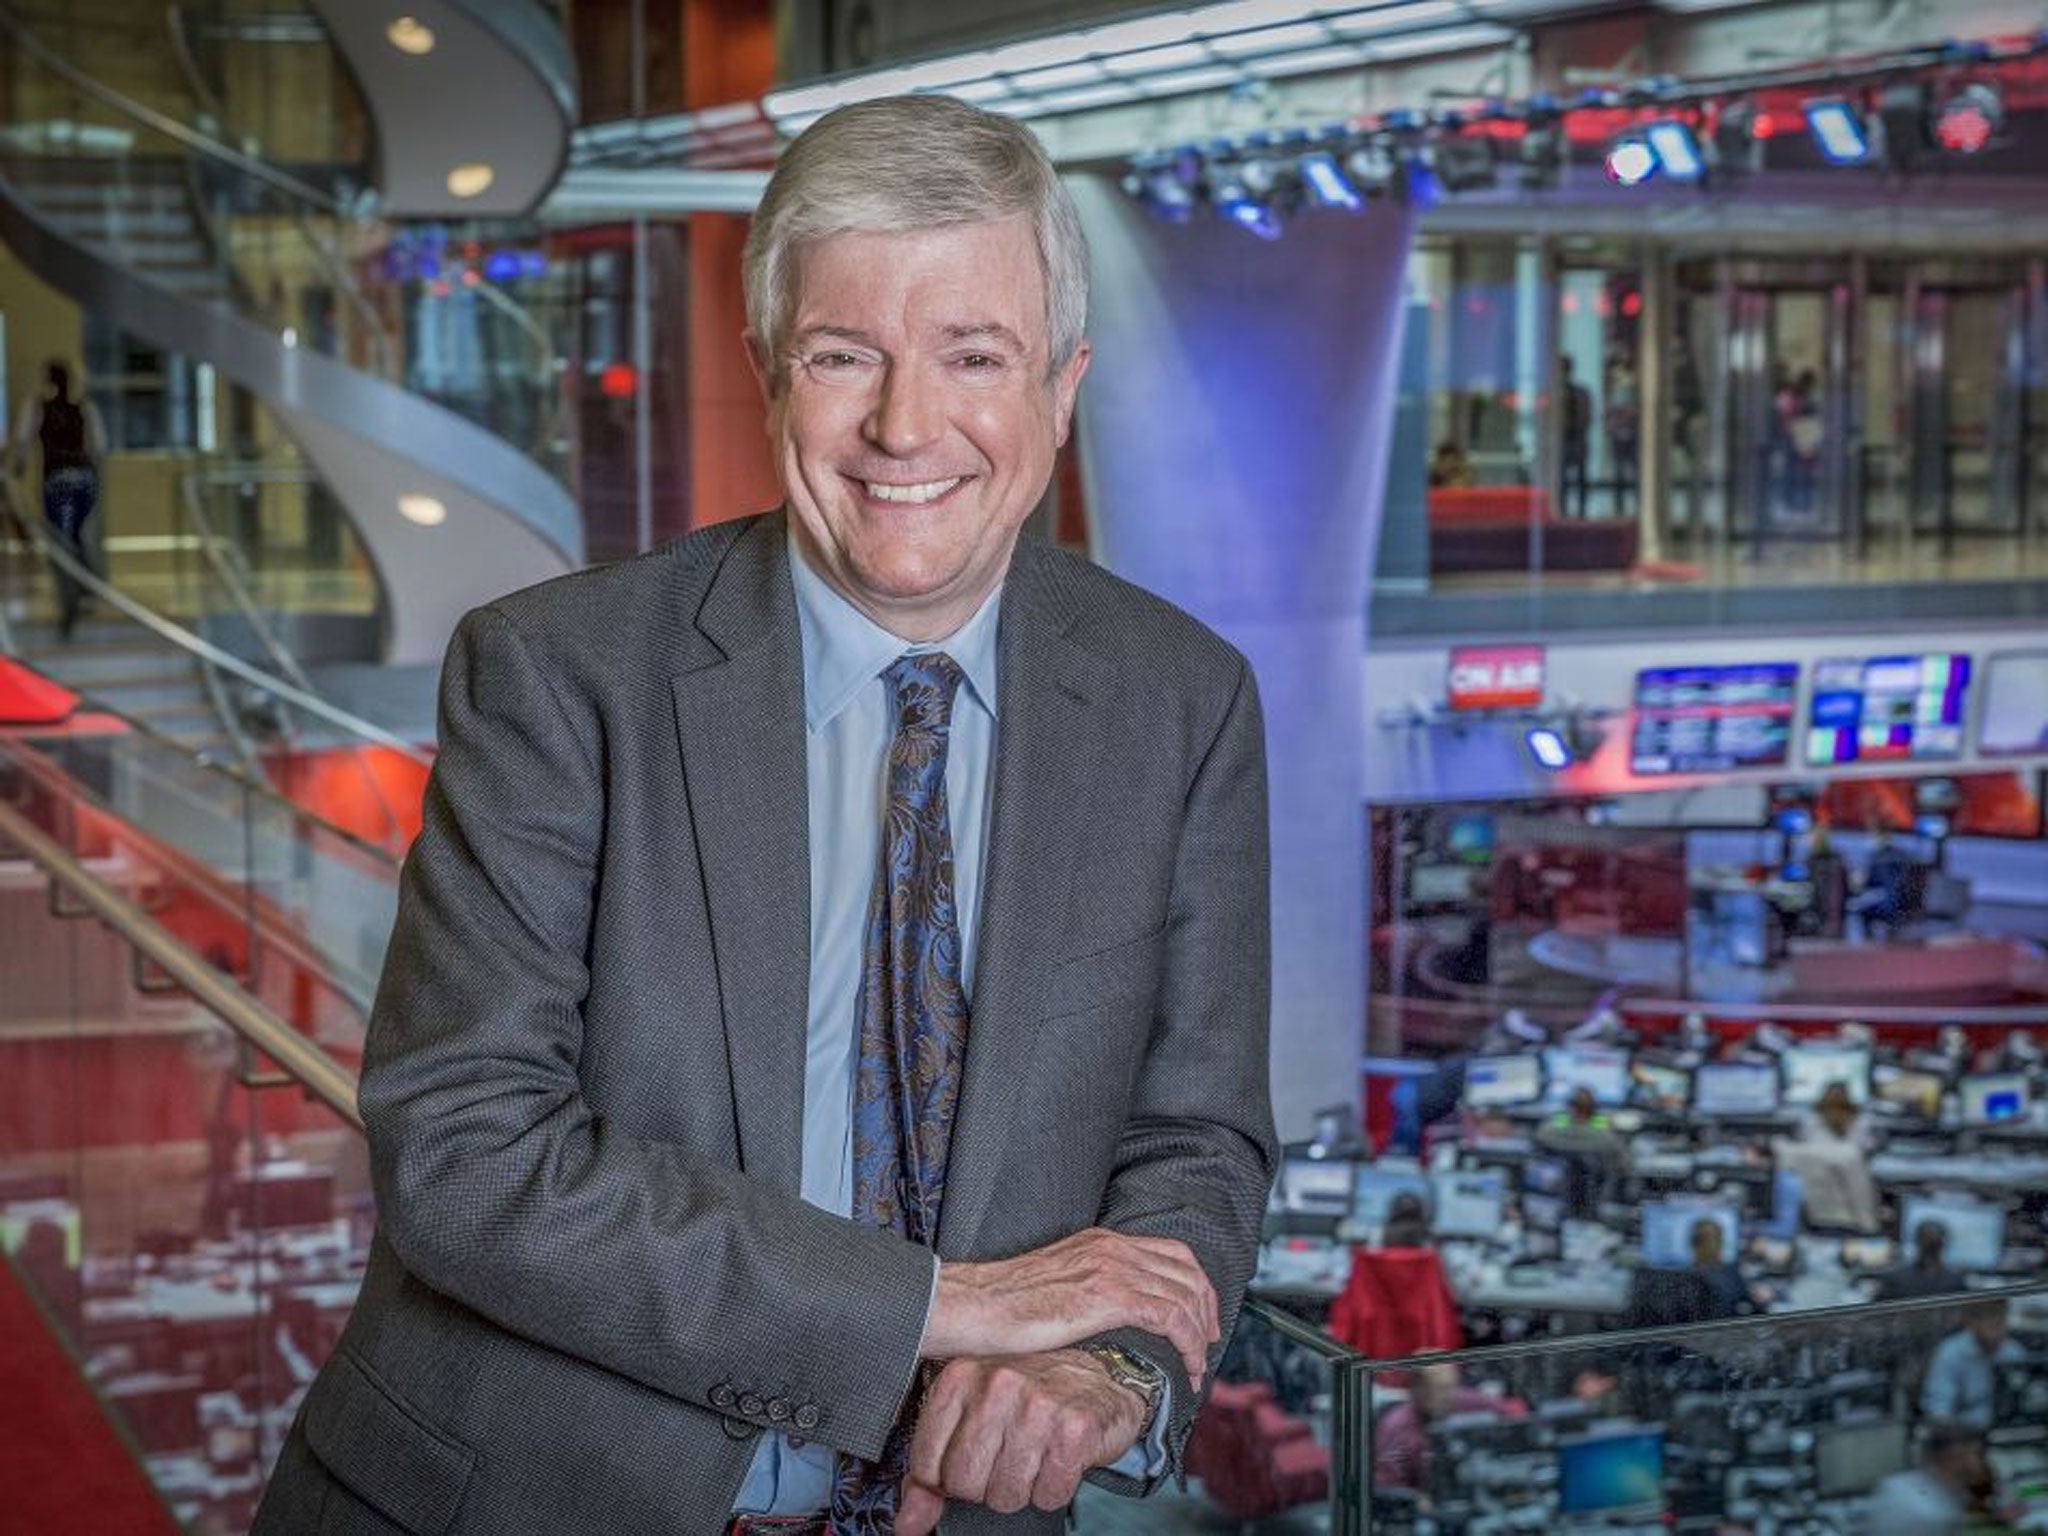 Centre stage: Tony Hall plans live broadcasts from the National Theatre